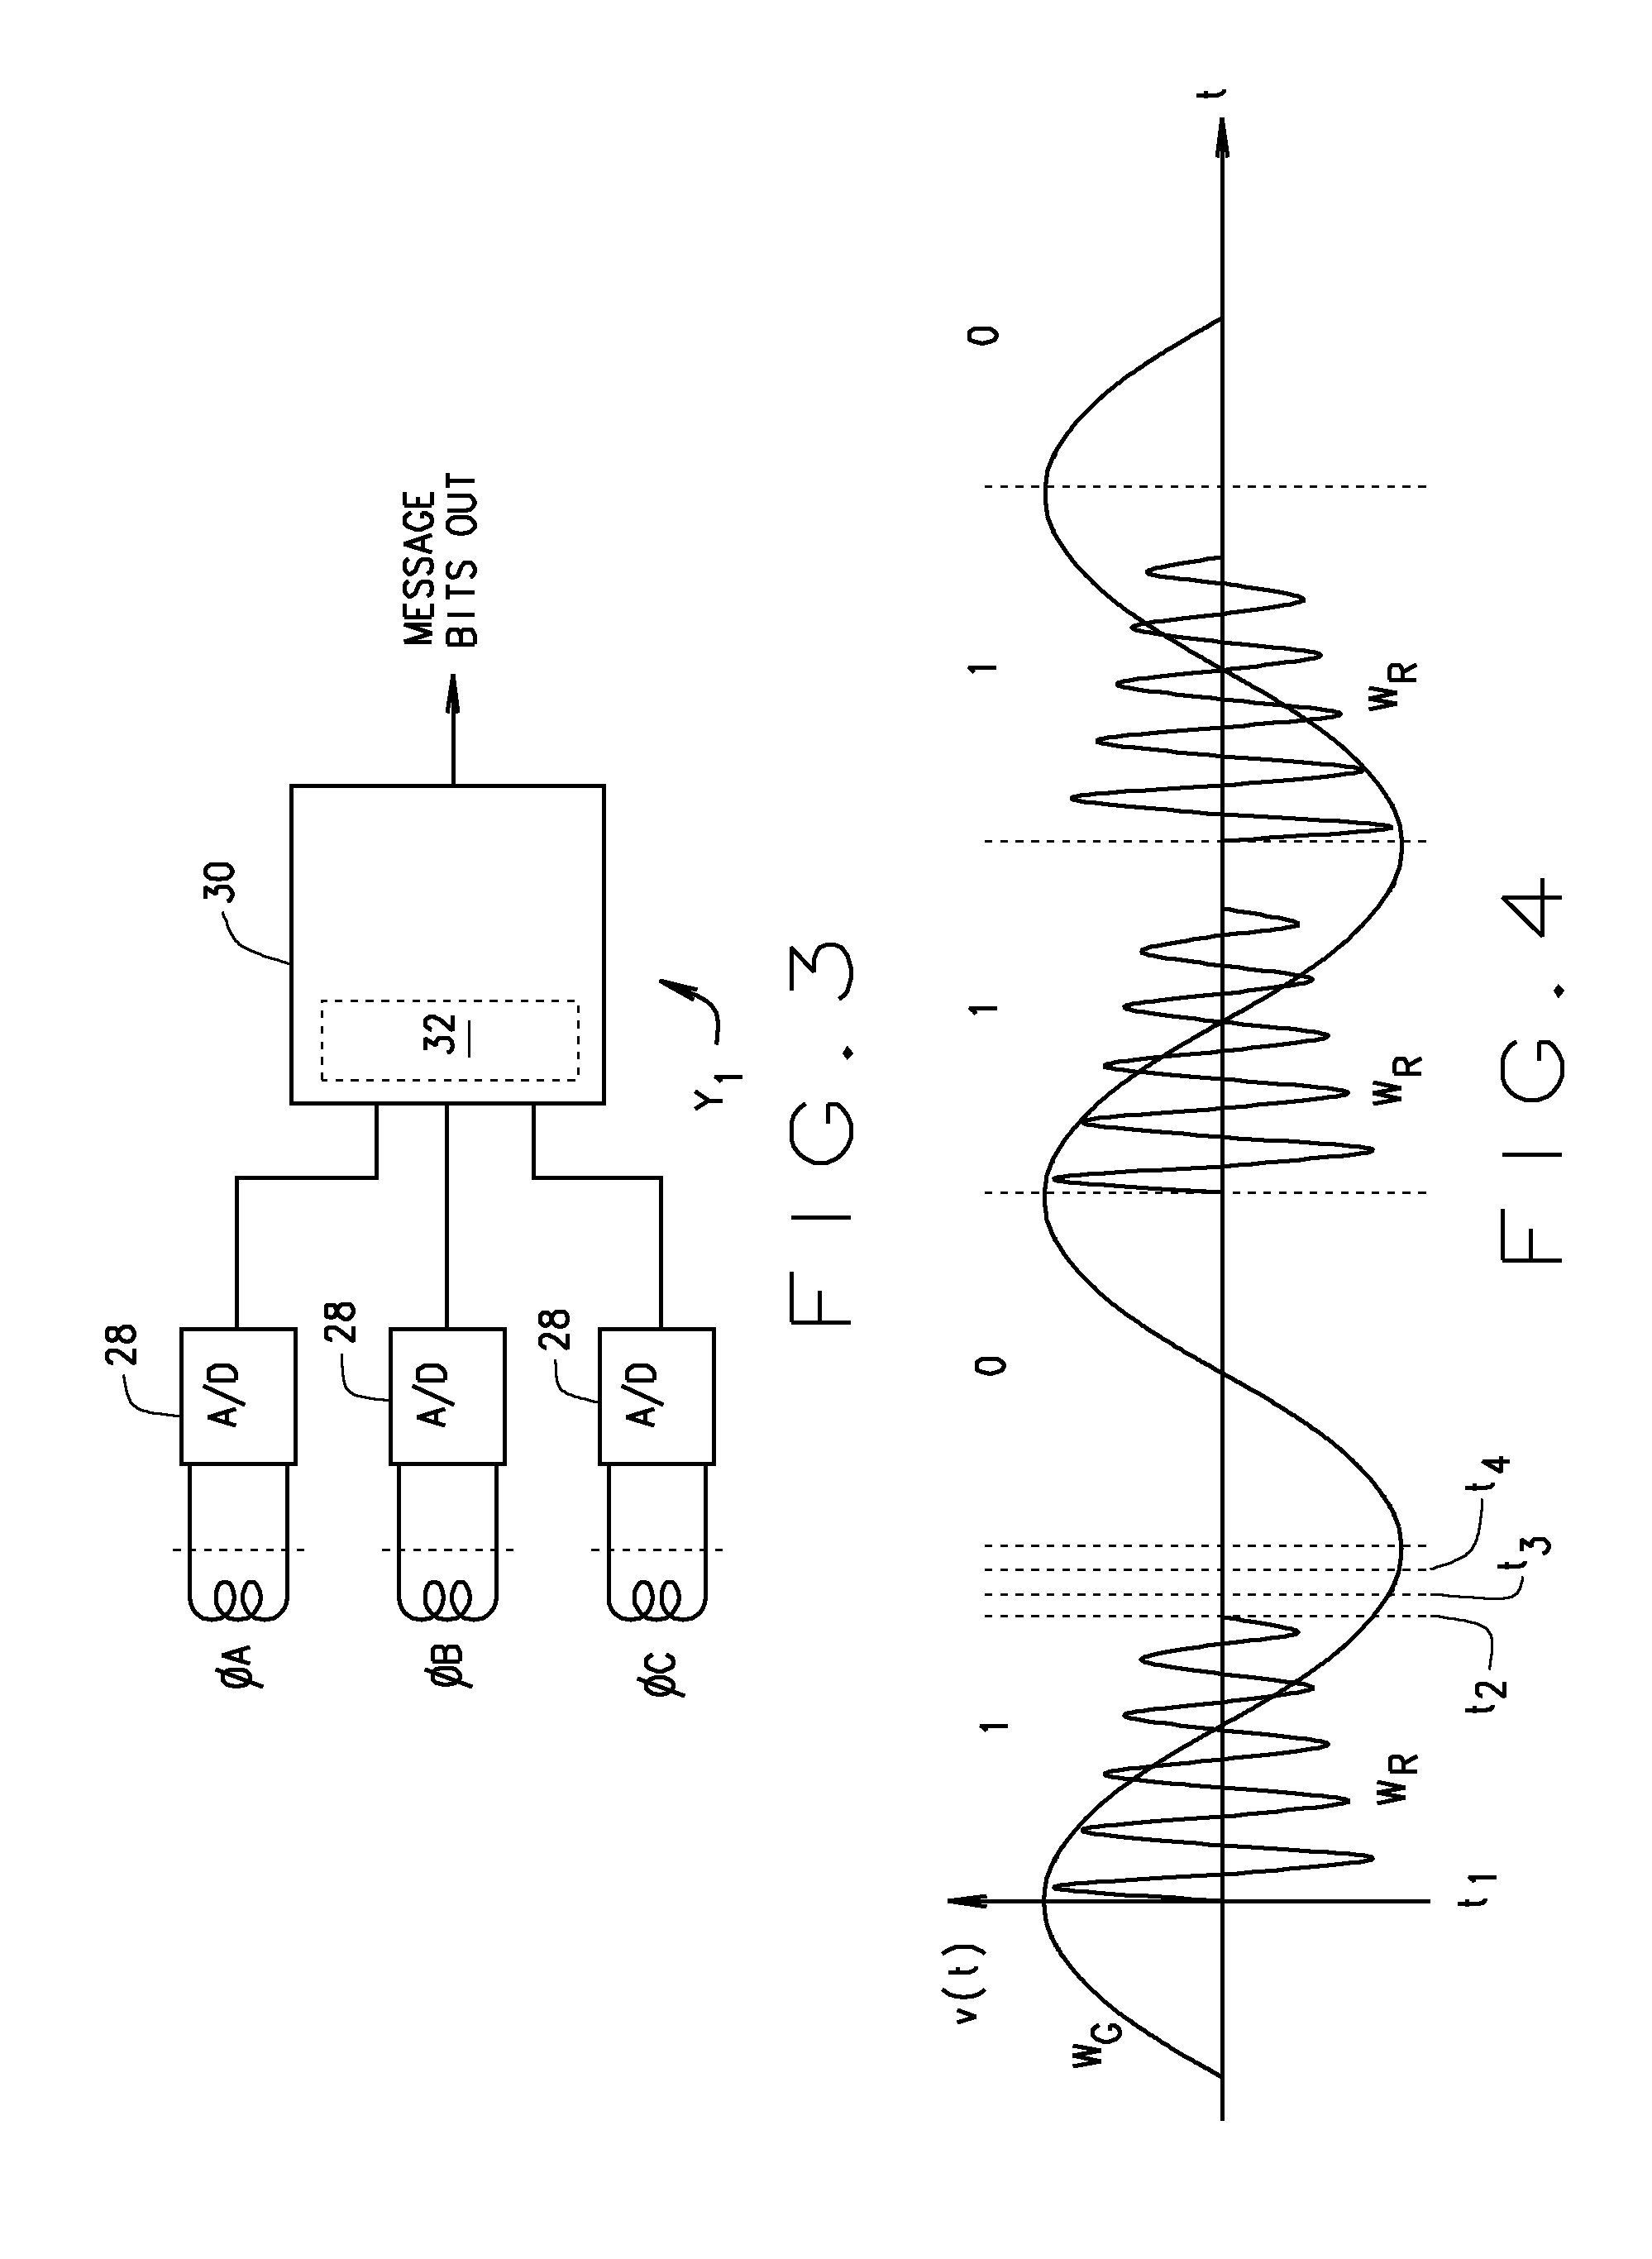 Point-to-point communications systems particularly for use in power distribution system